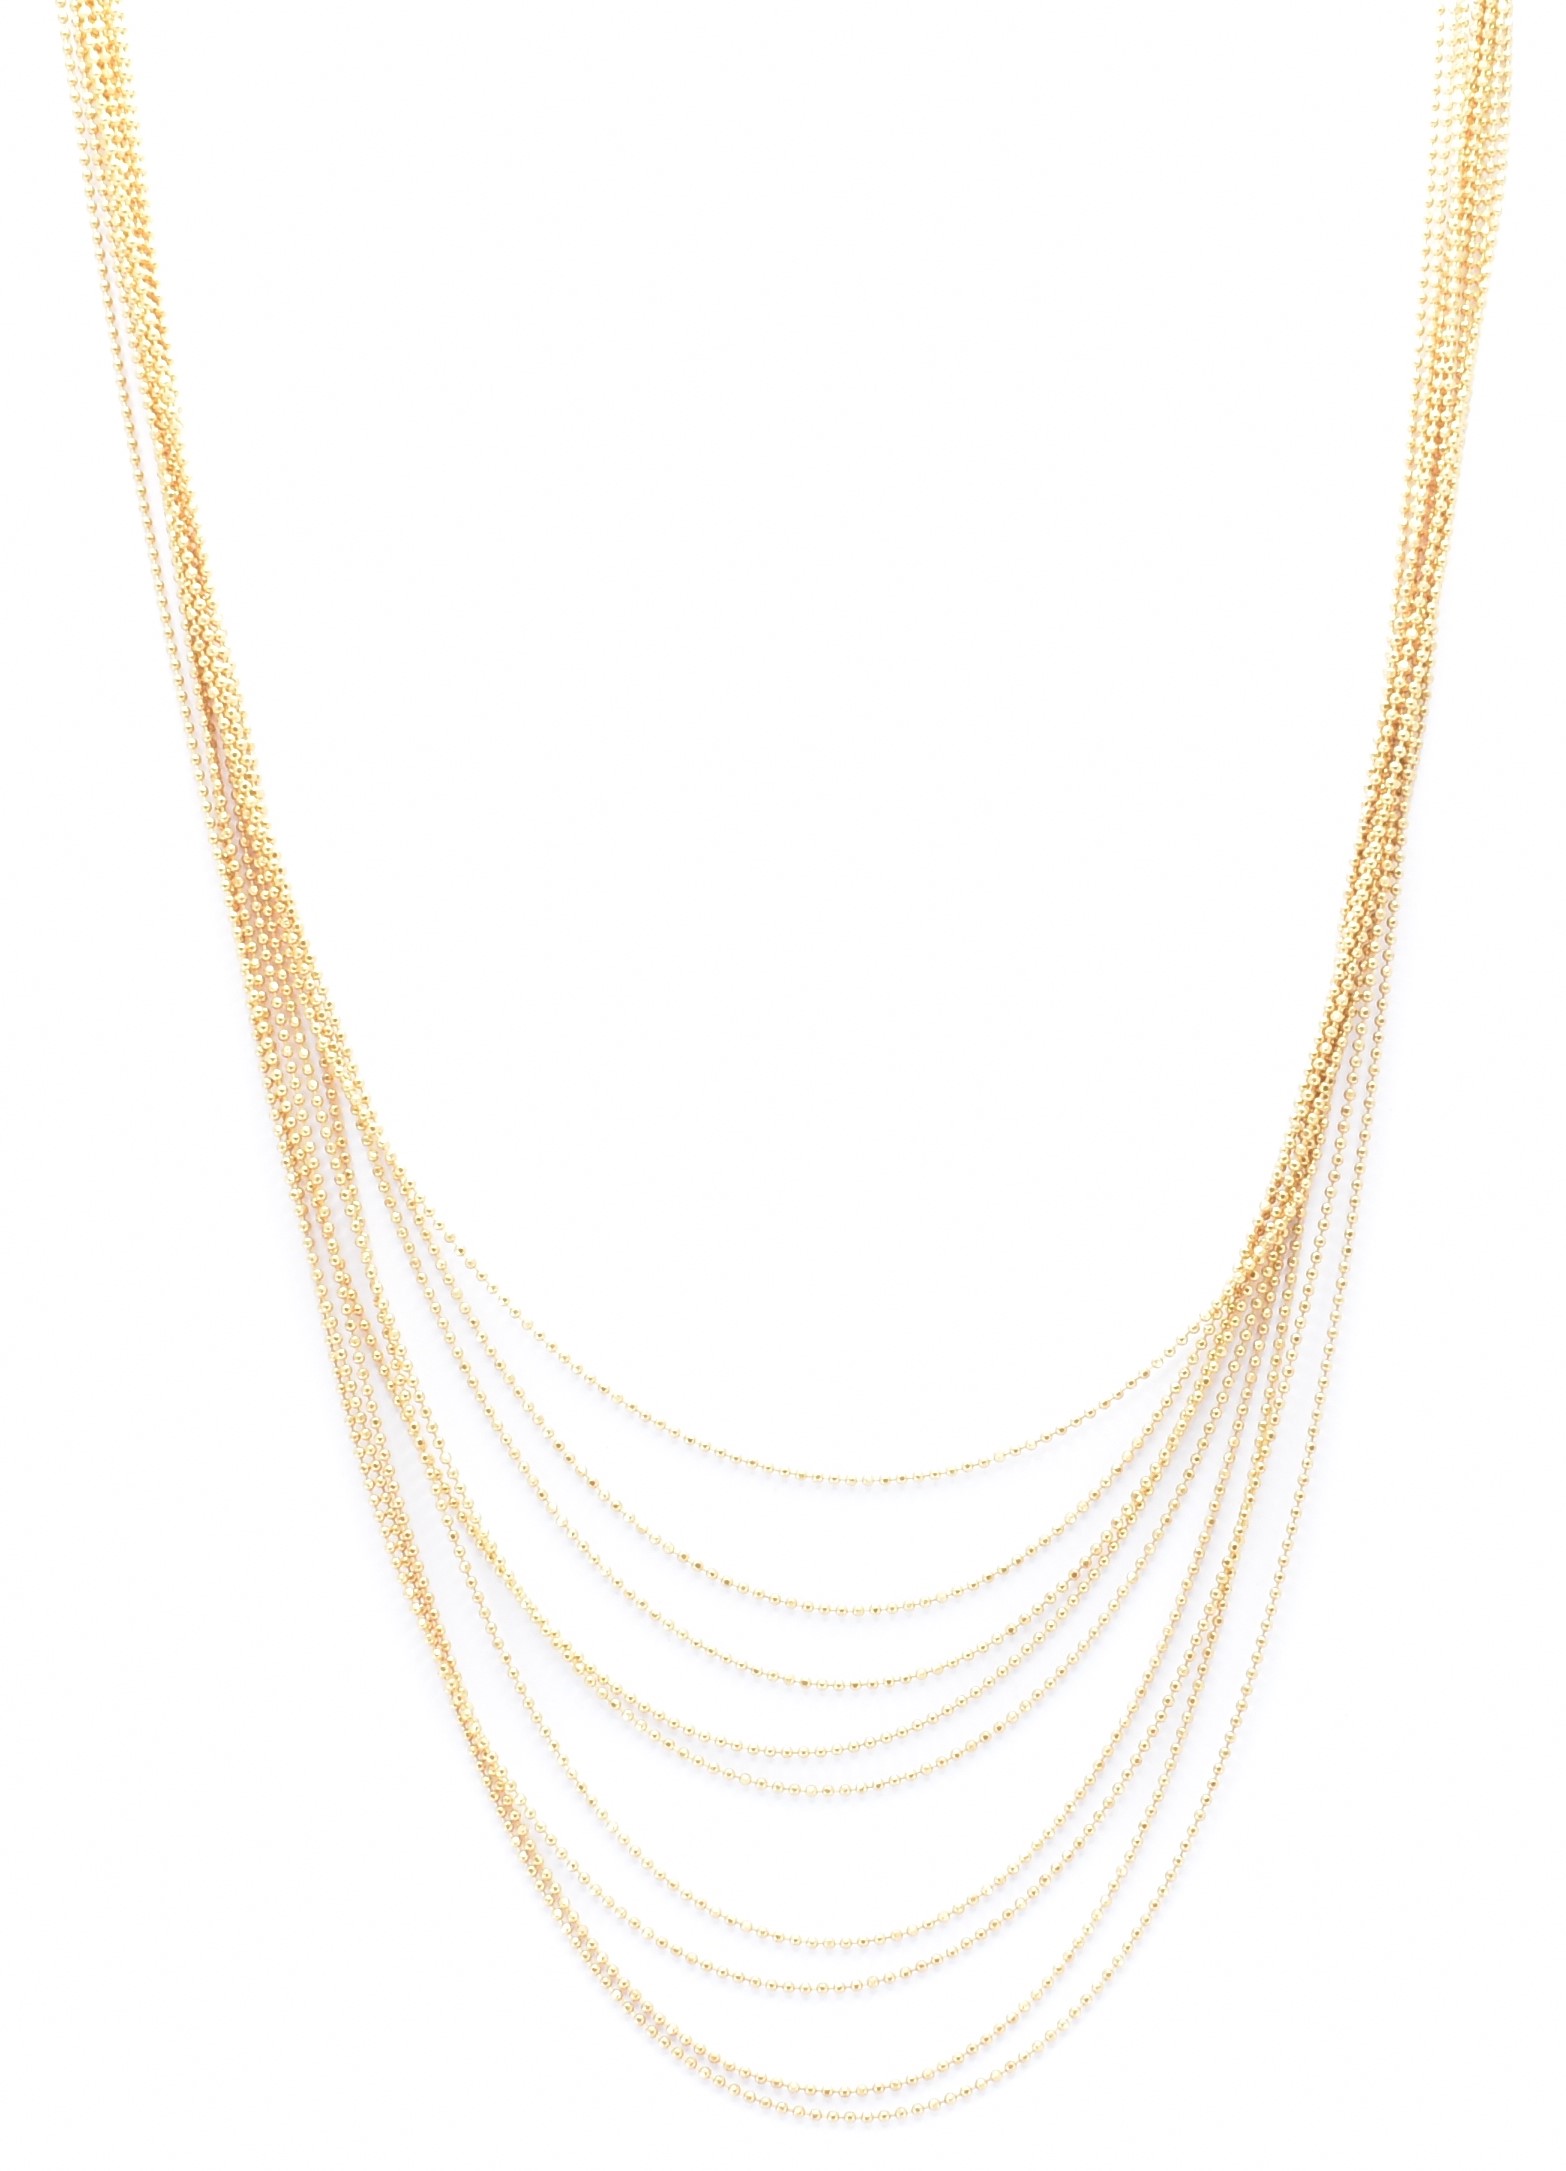 14K CONTINENTAL GOLD EIGHT STRING NECKLACE